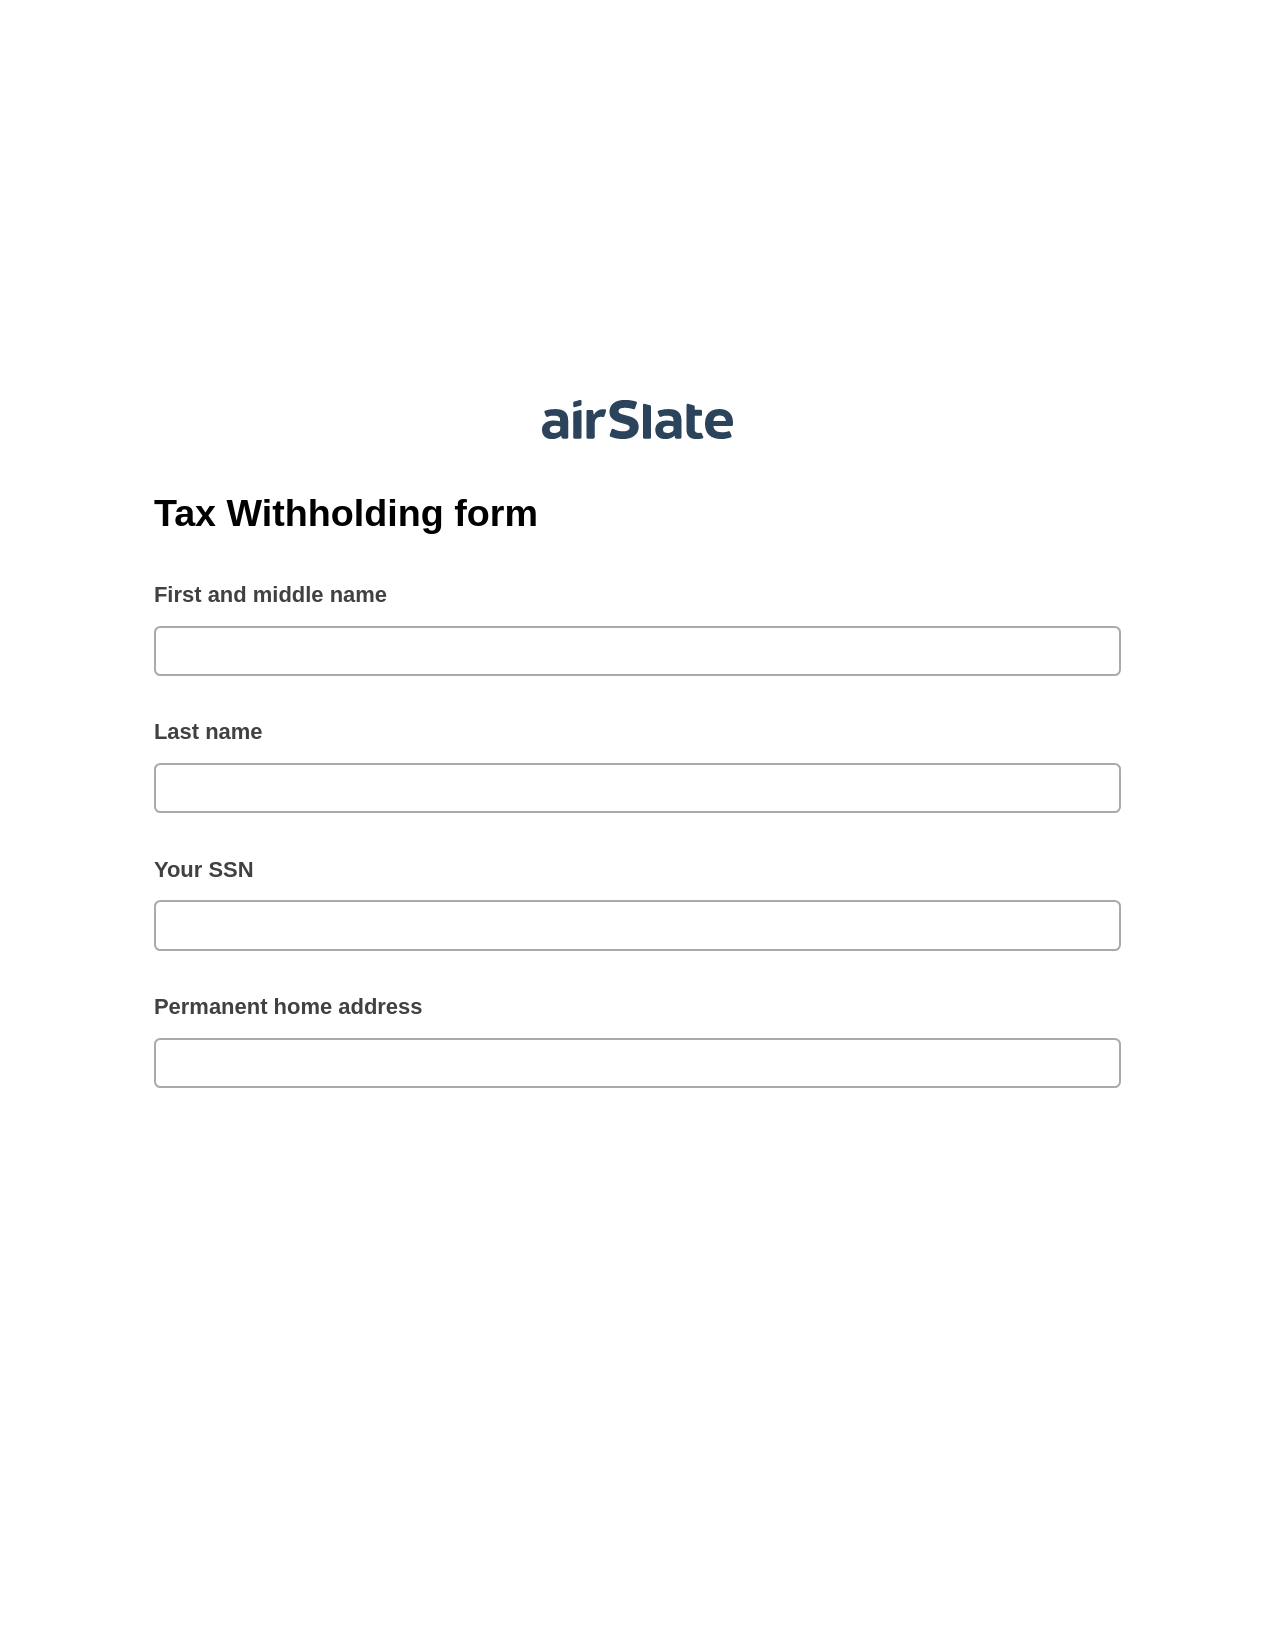 Multirole Tax Withholding form Pre-fill Slate from MS Dynamics 365 Records Bot, Pre-fill with Custom Data Bot, Google Drive Bot